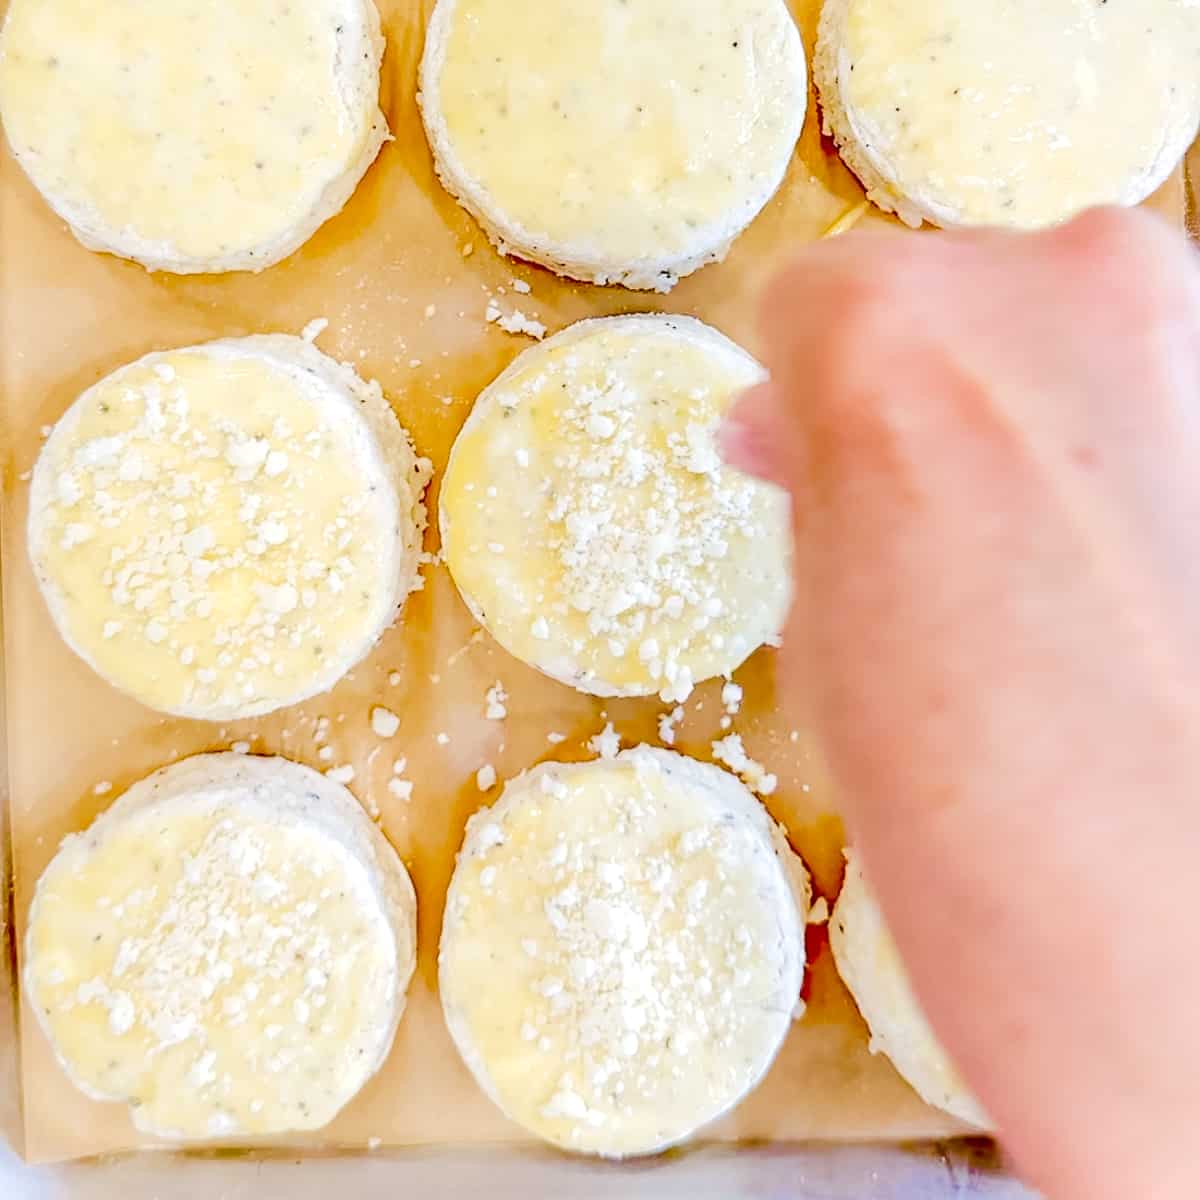 Sprinkling grated romano cheese on top of biscuits.